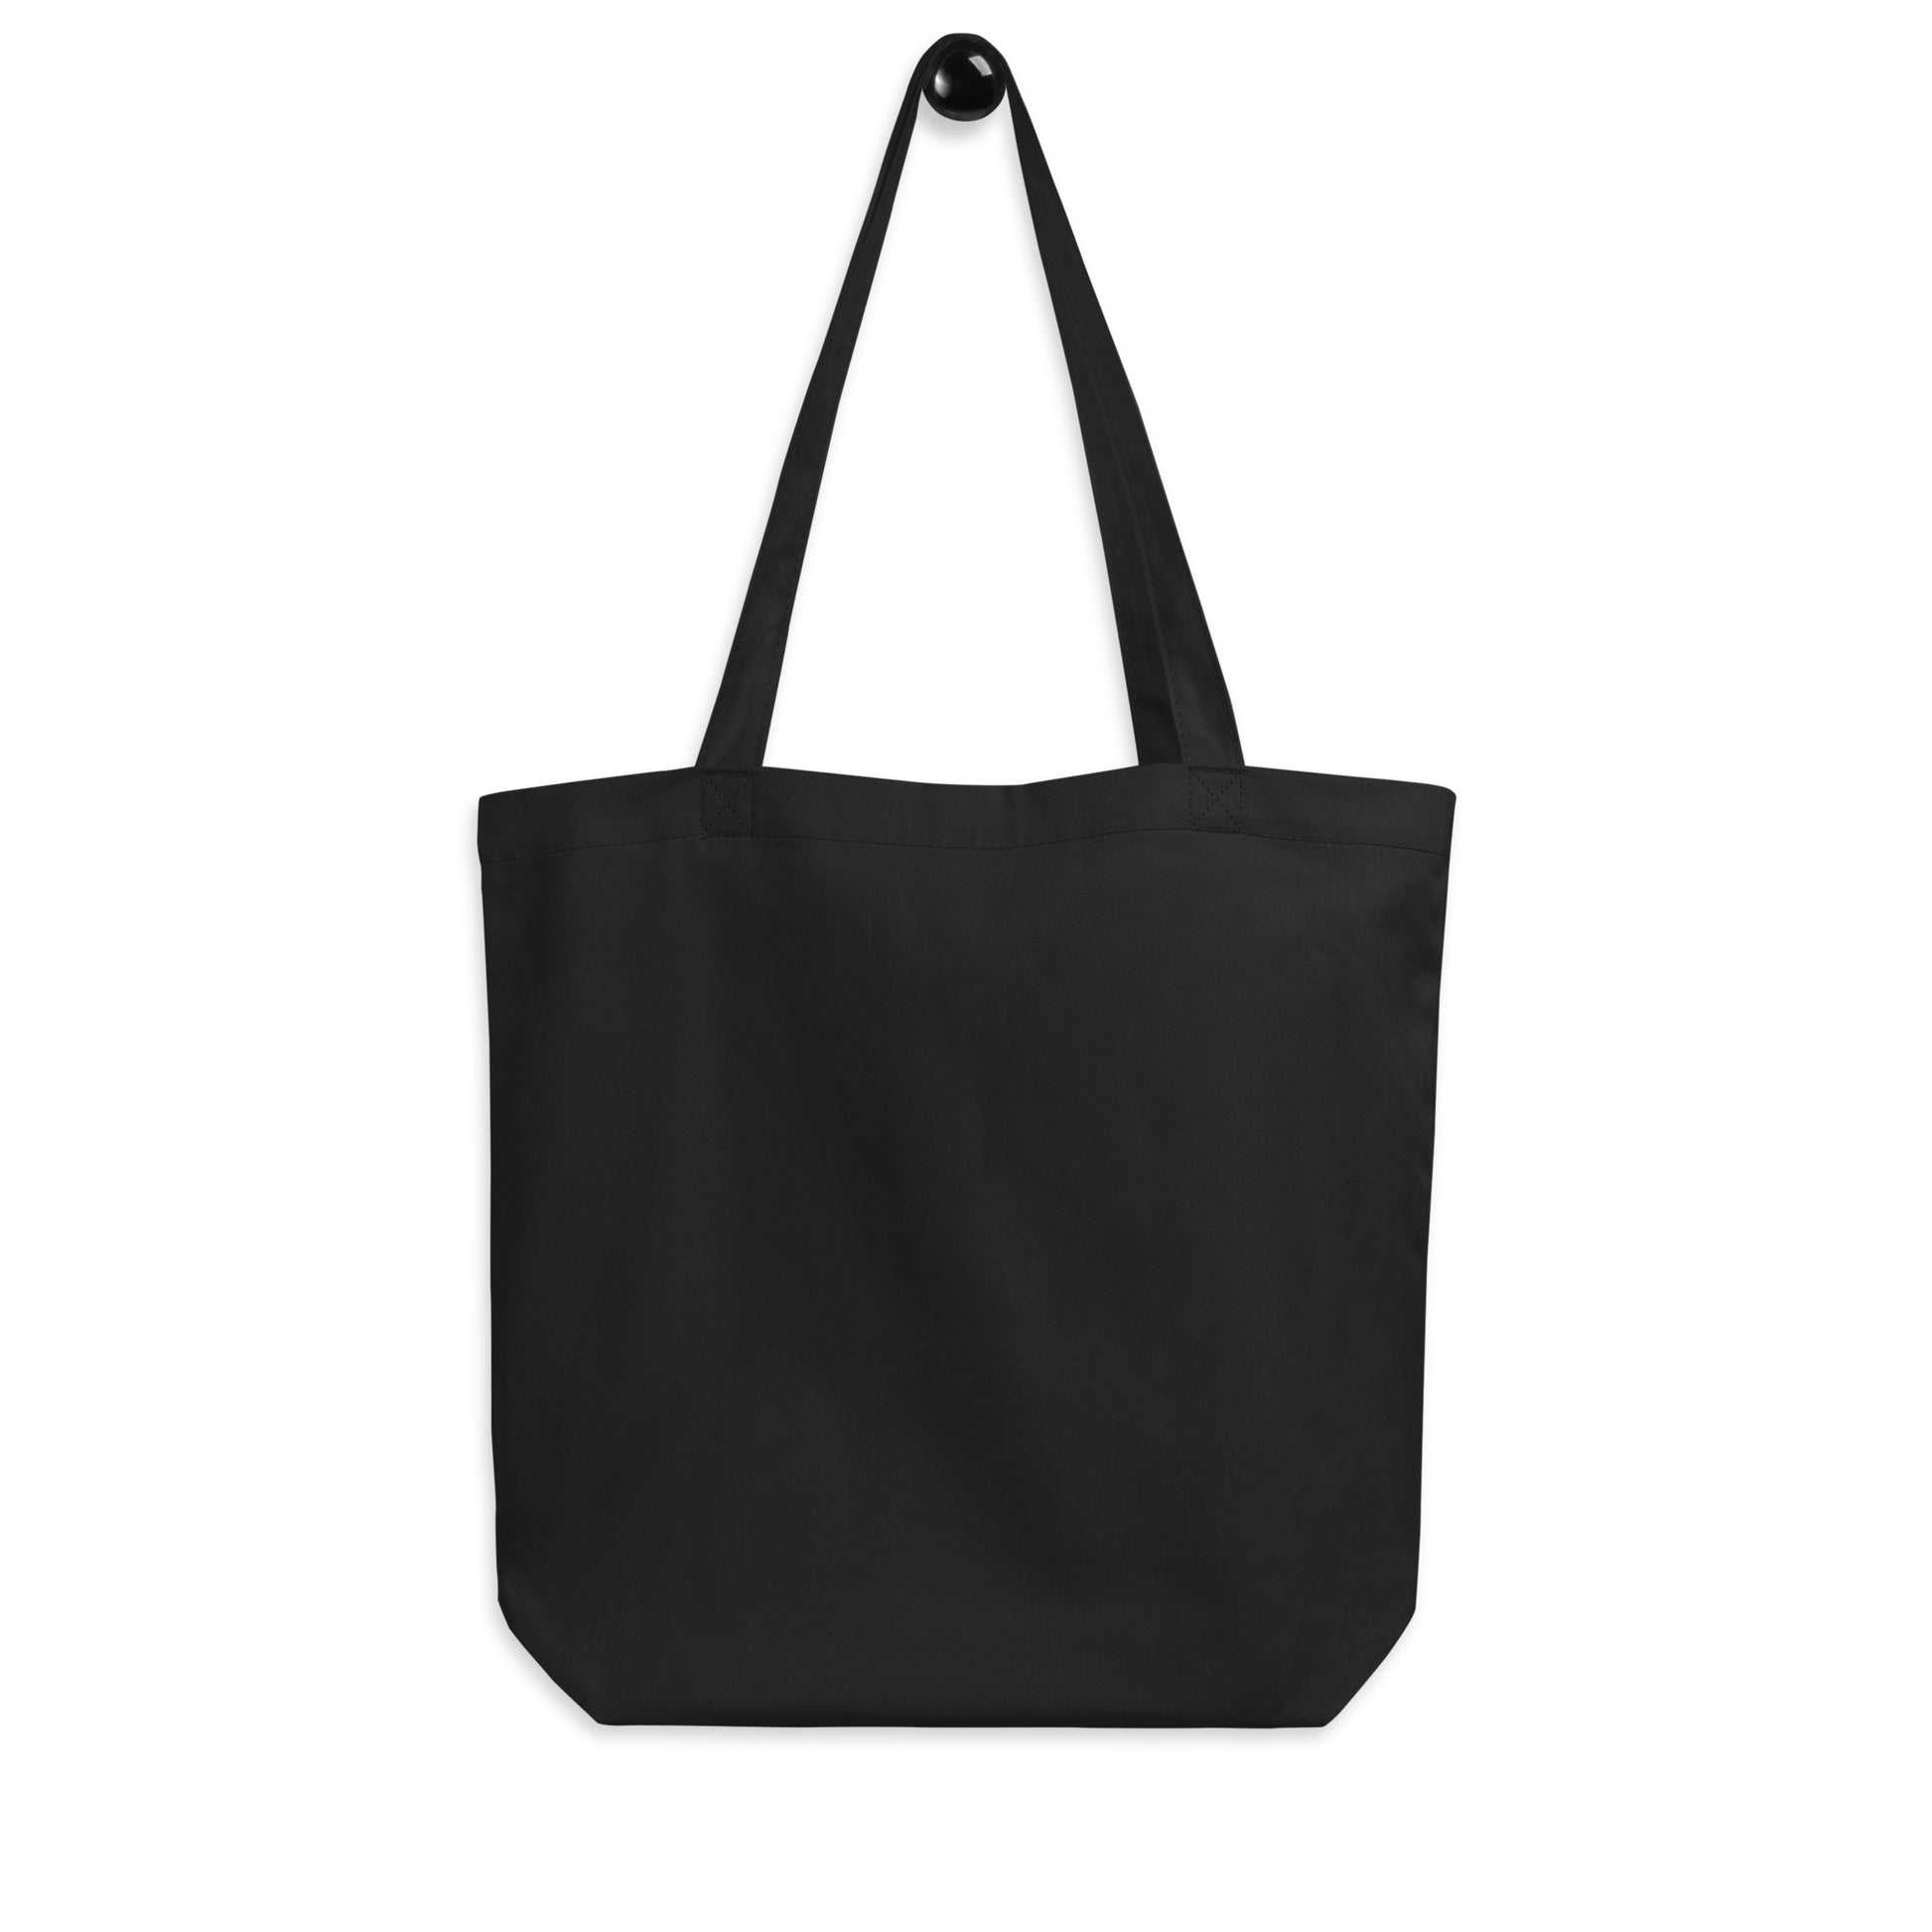 Unique Travel Gift Organic Tote - White Oval • ORD Chicago • YHM Designs - Image 05